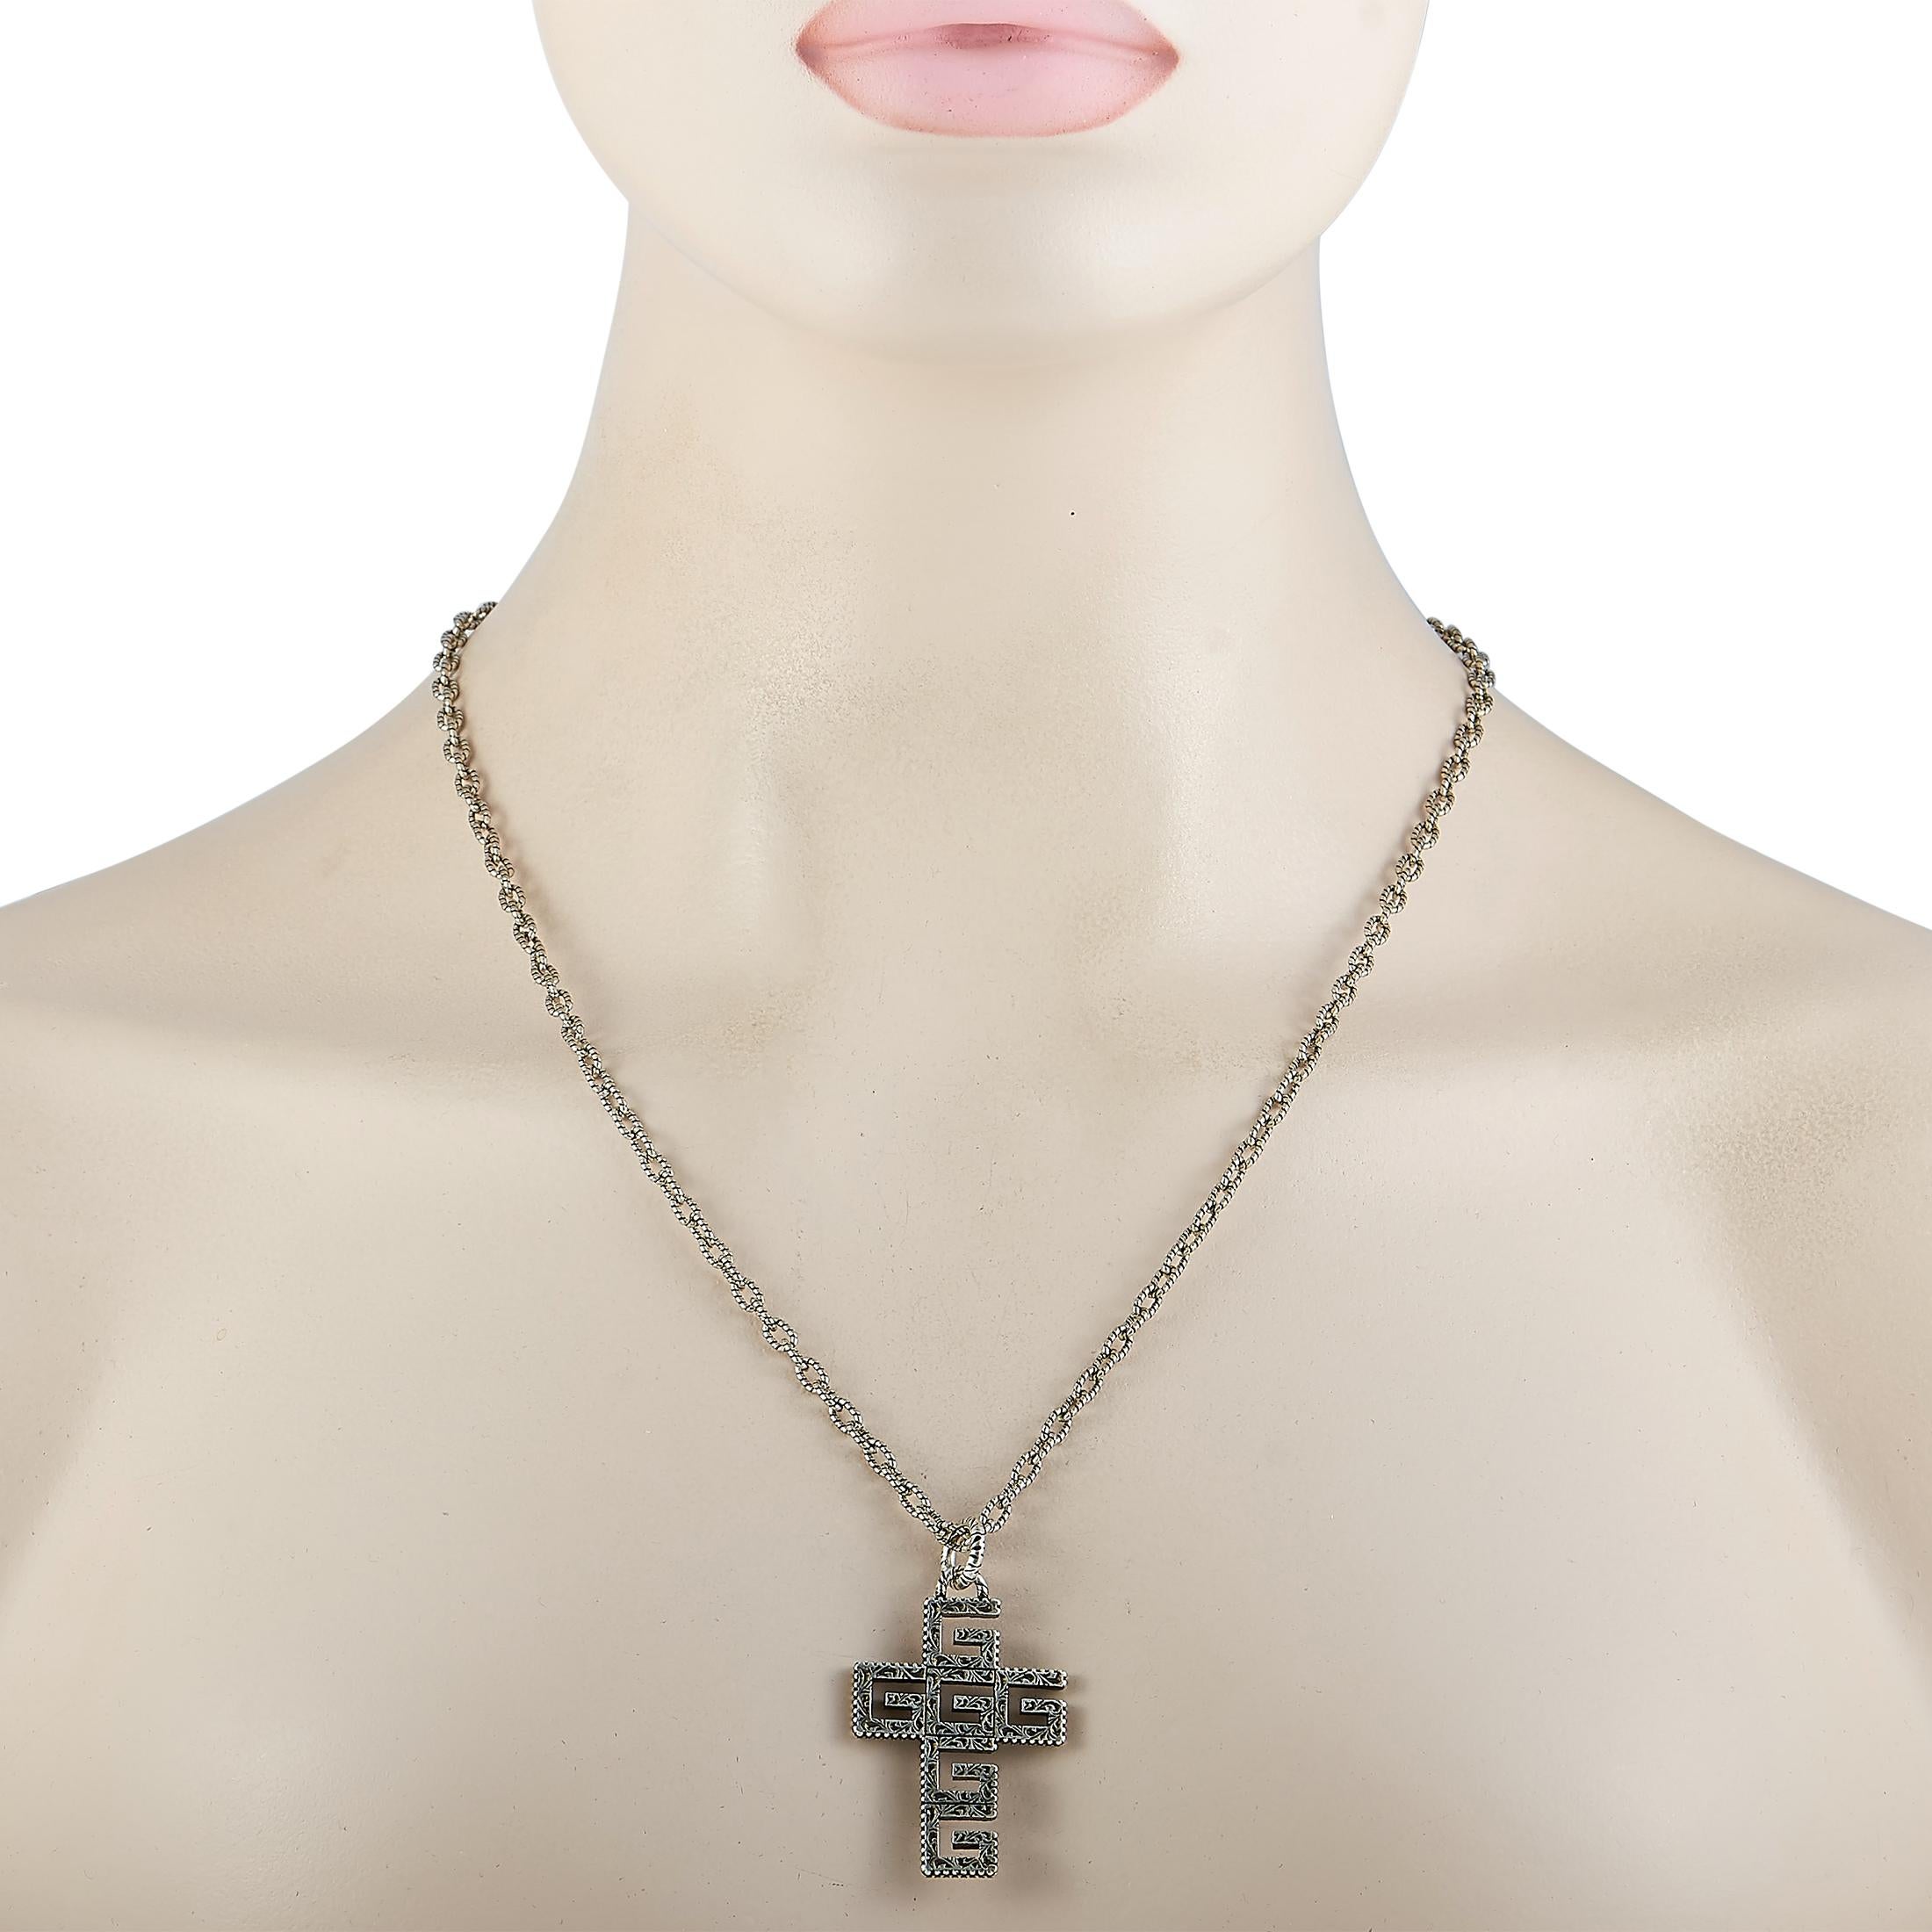 This Gucci necklace is crafted from sterling silver and weighs 28.9 grams. The necklace is presented with a 27” chain and boasts a G-Cube cross pendant that measures 1.75” in length and 1.12” in width.

Offered in brand new condition, this jewelry